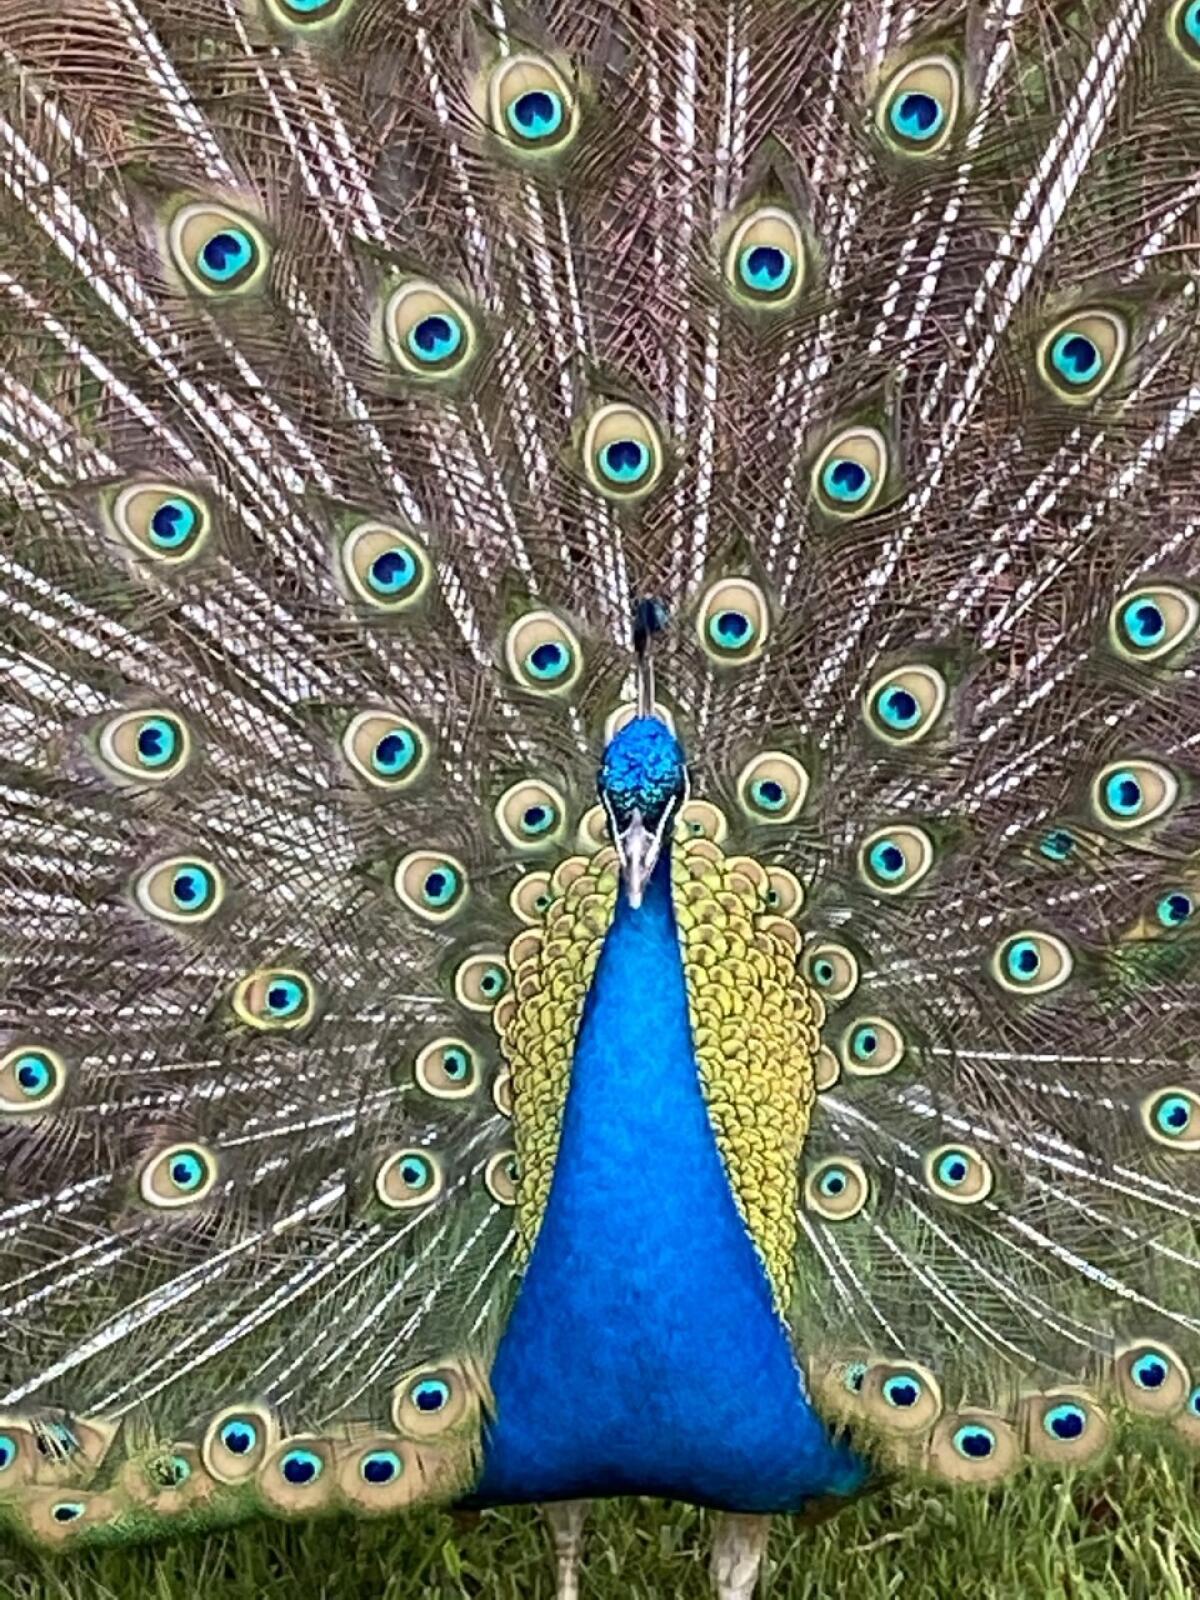 A peacock showing its feathers 